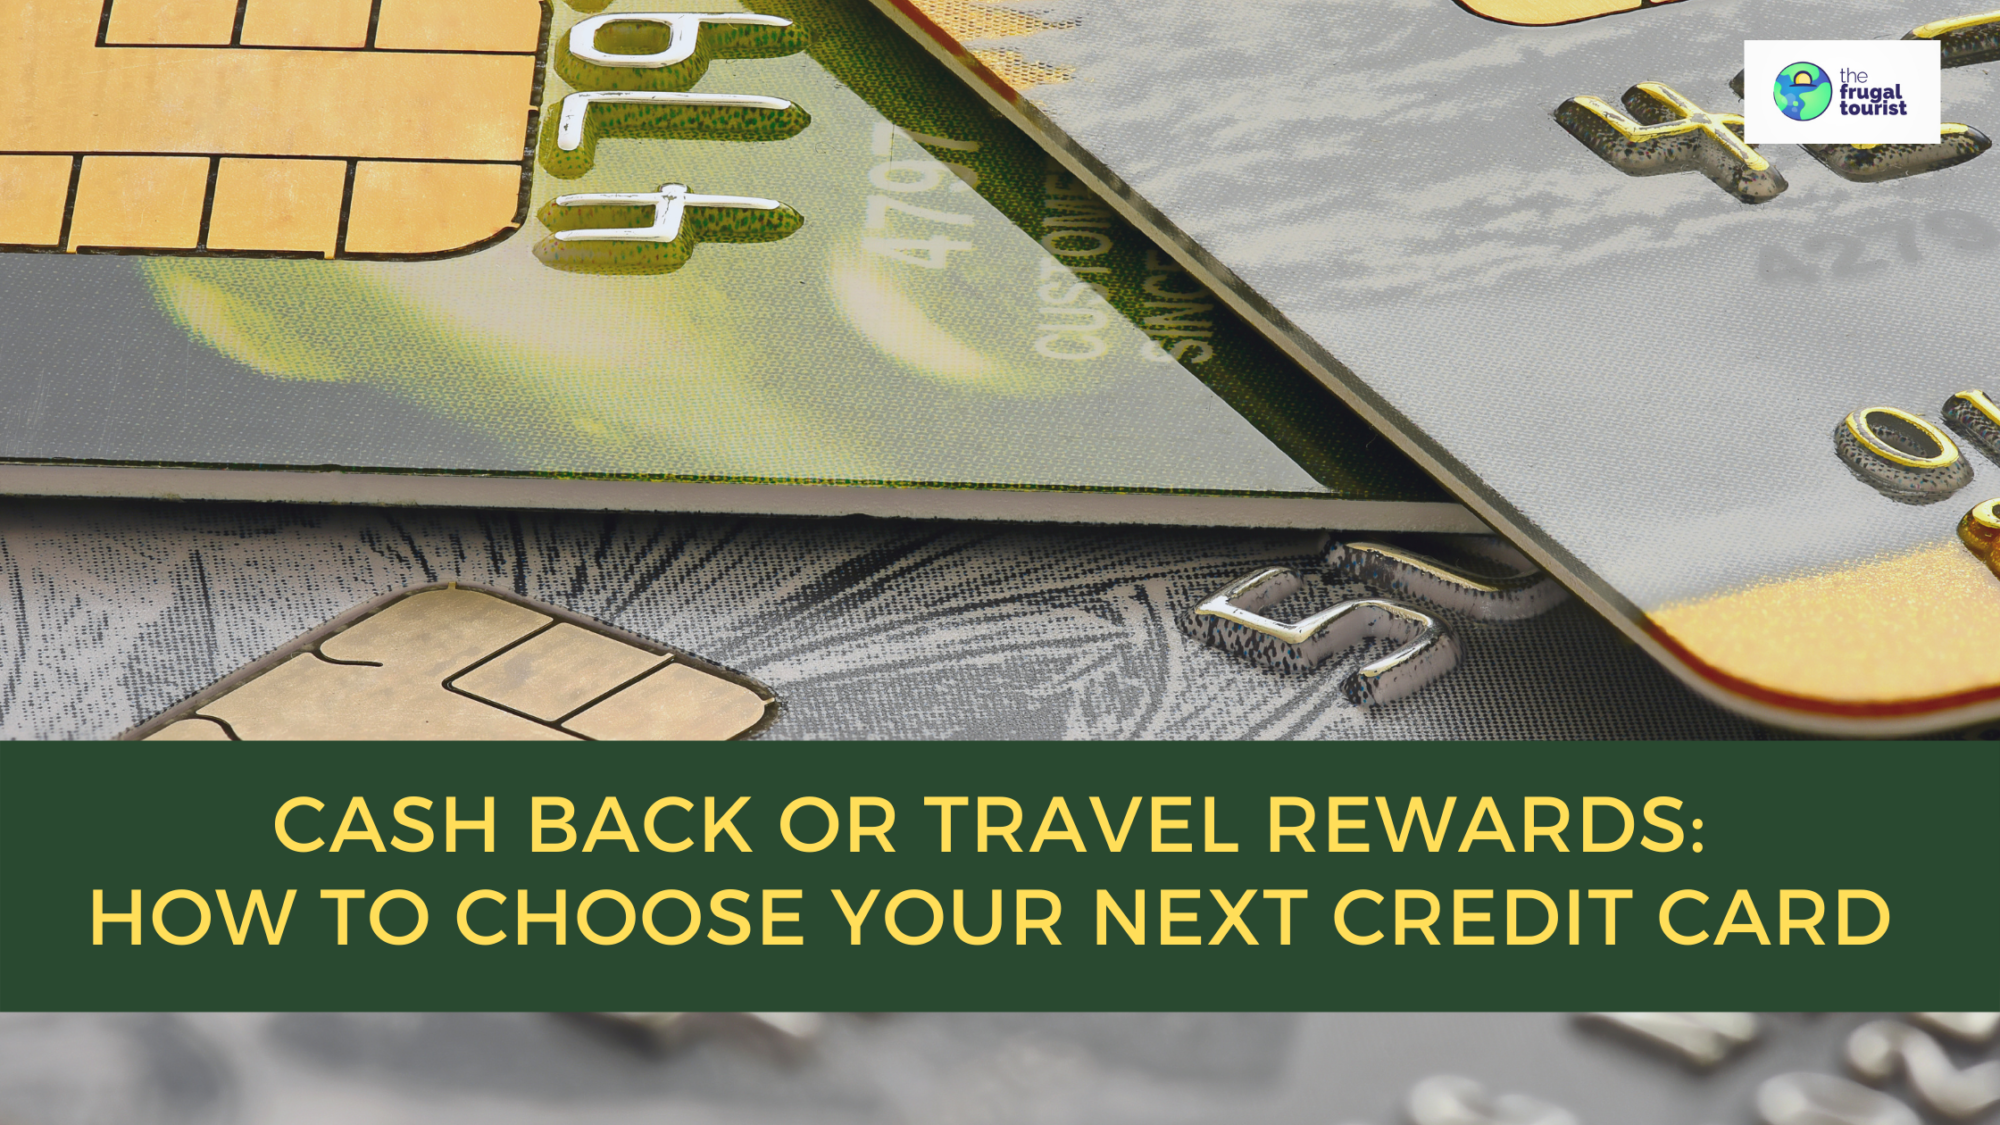 Cash Back or Travel Rewards: How To Choose Your Next Credit Card